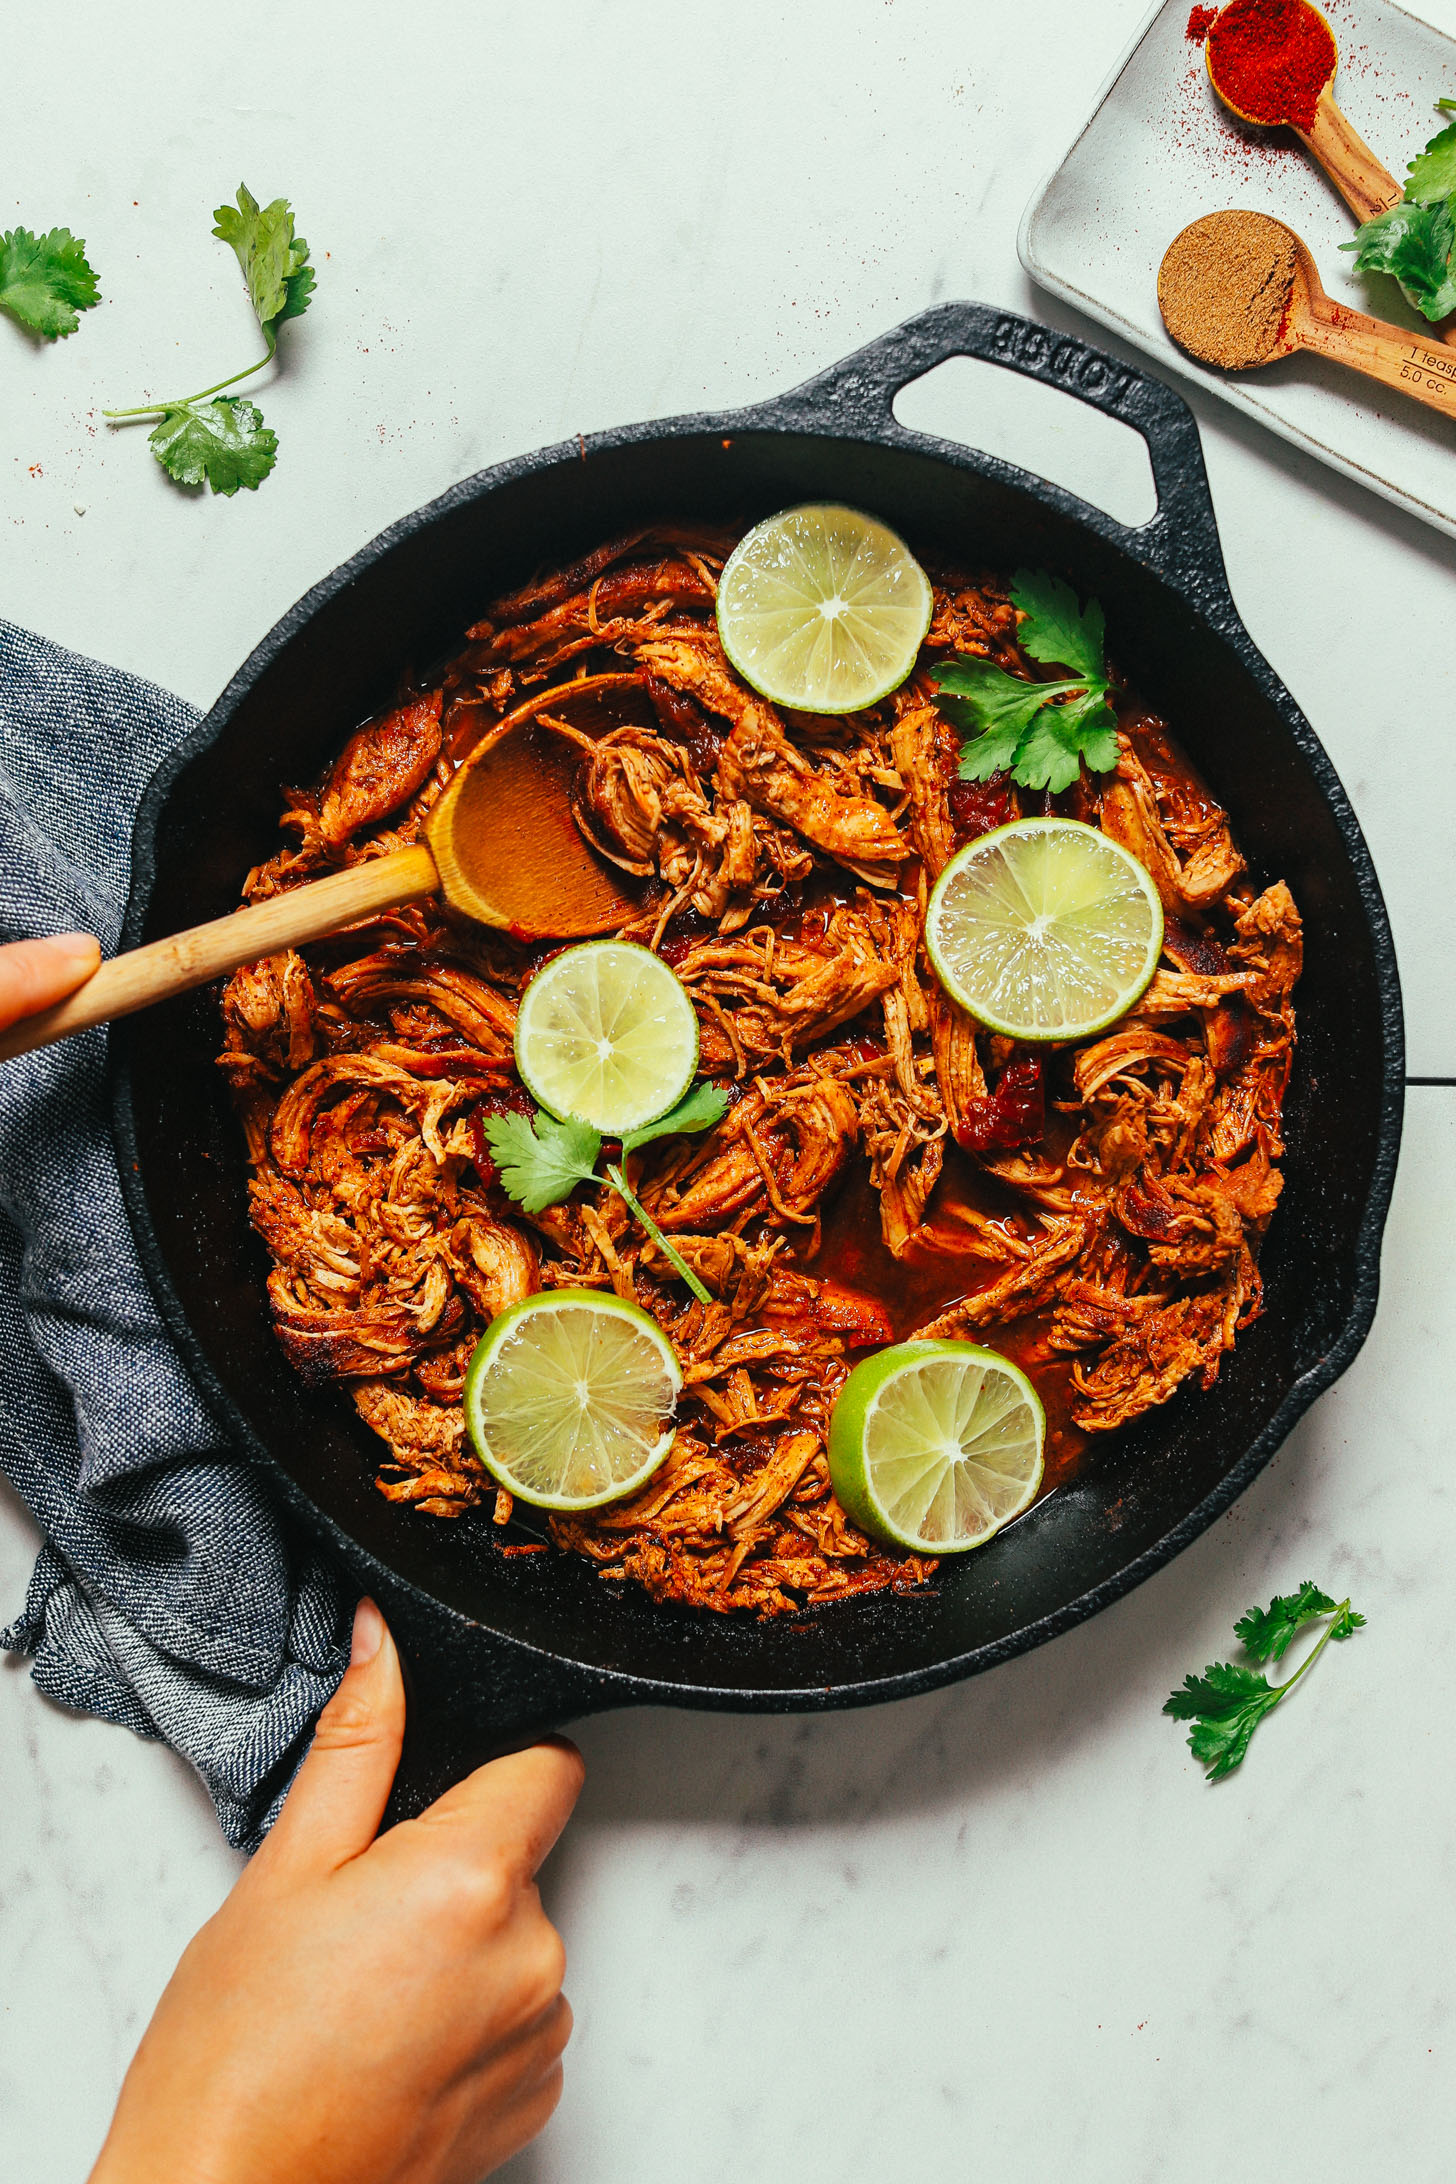 Wooden spoon in a skillet of Mexican Shredded Chicken topped with cilantro and limes